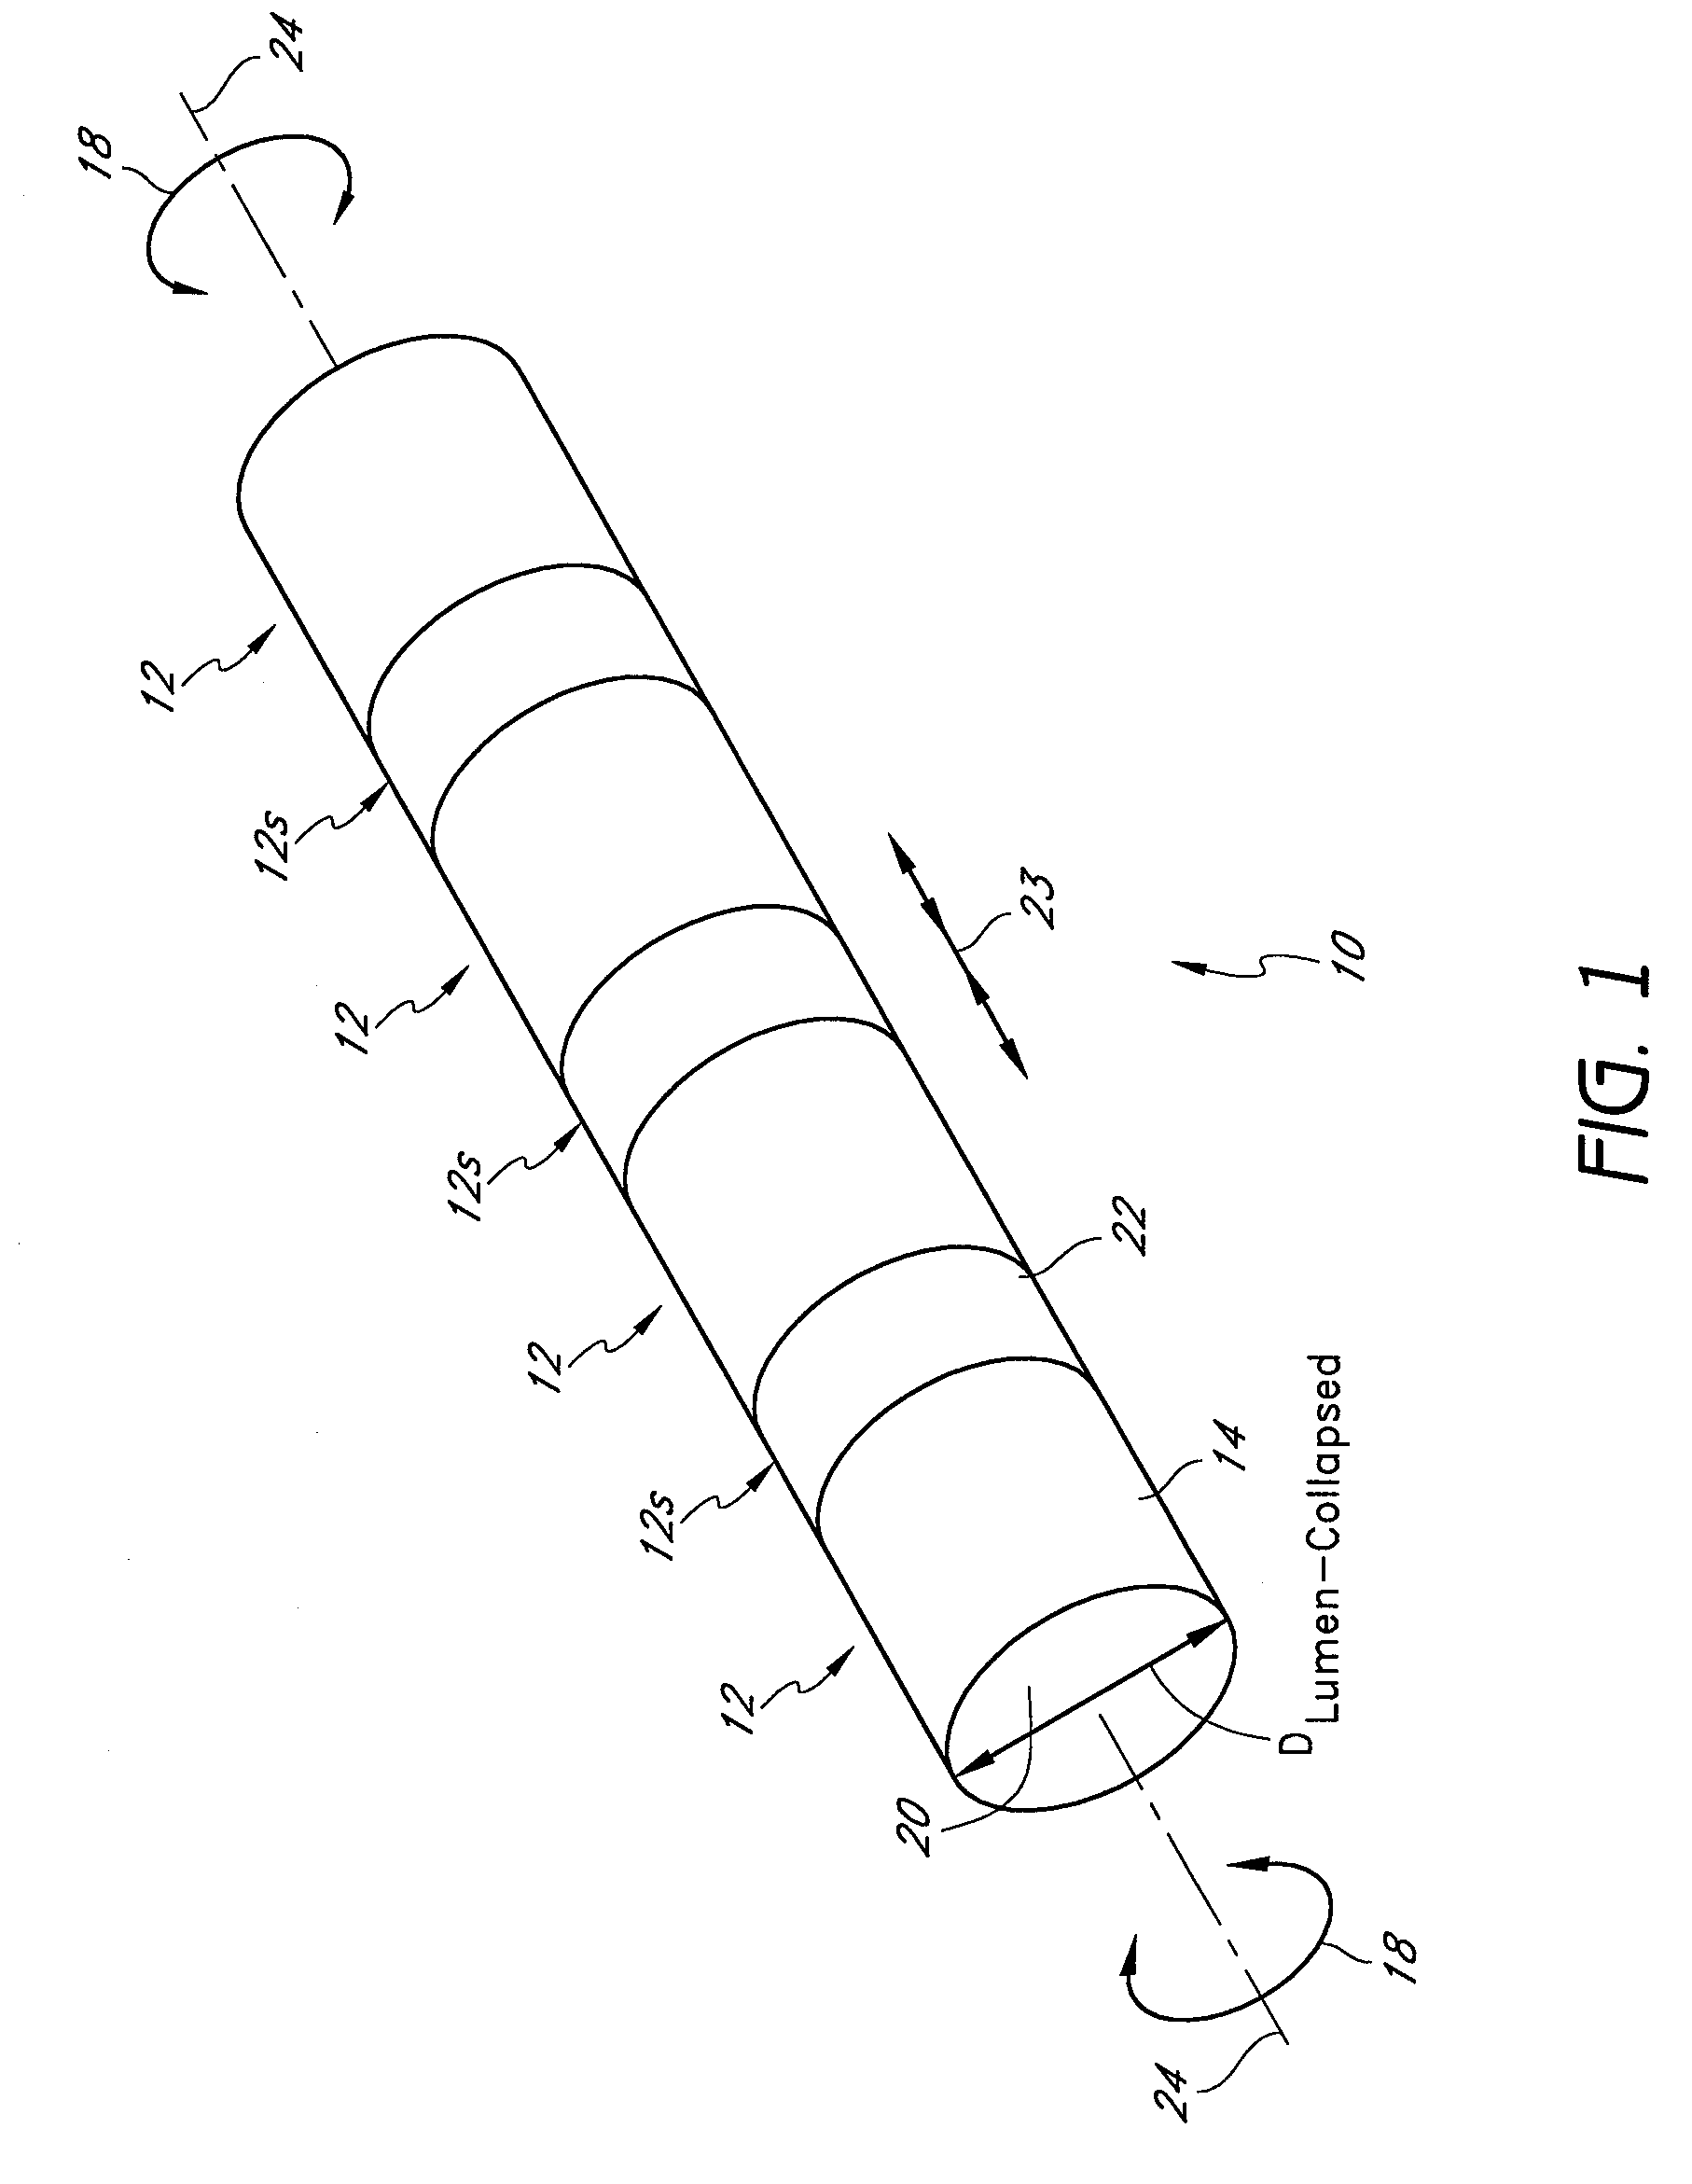 Circumferentially nested expandable device